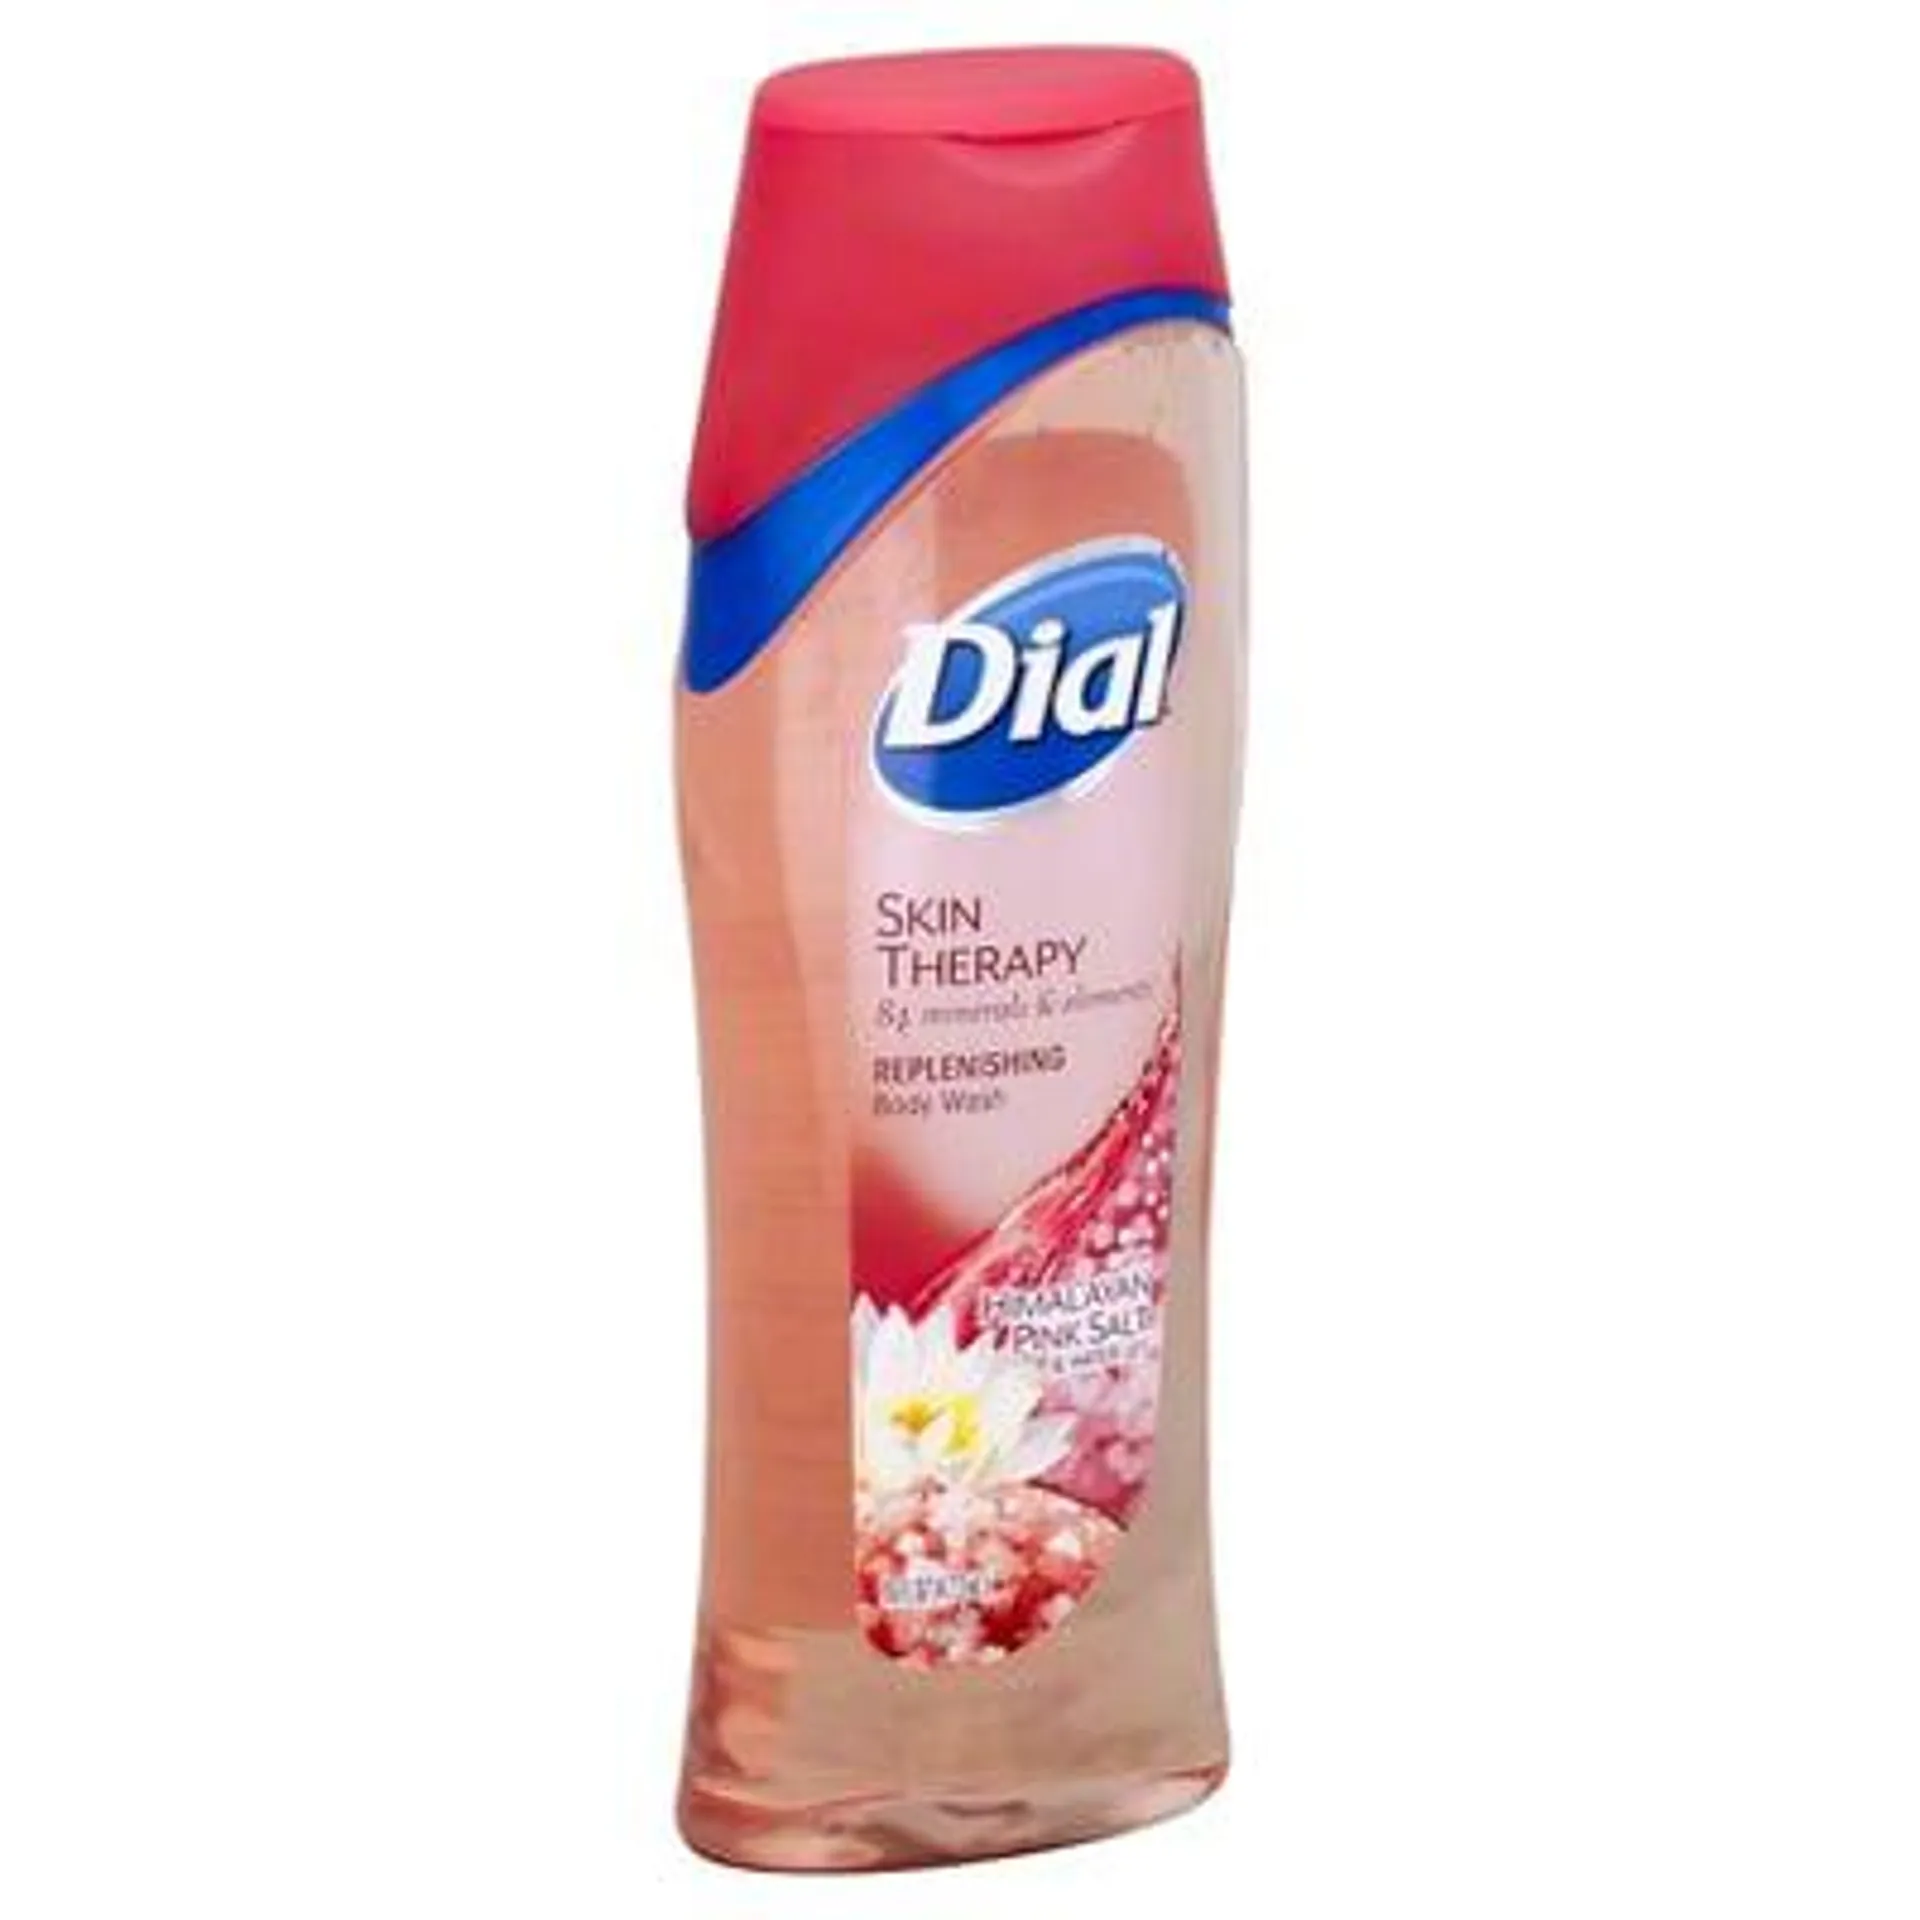 Dial, Skin Therapy - Body Wash, Replenishing, with Himalayan Pink Salt & Water Lily